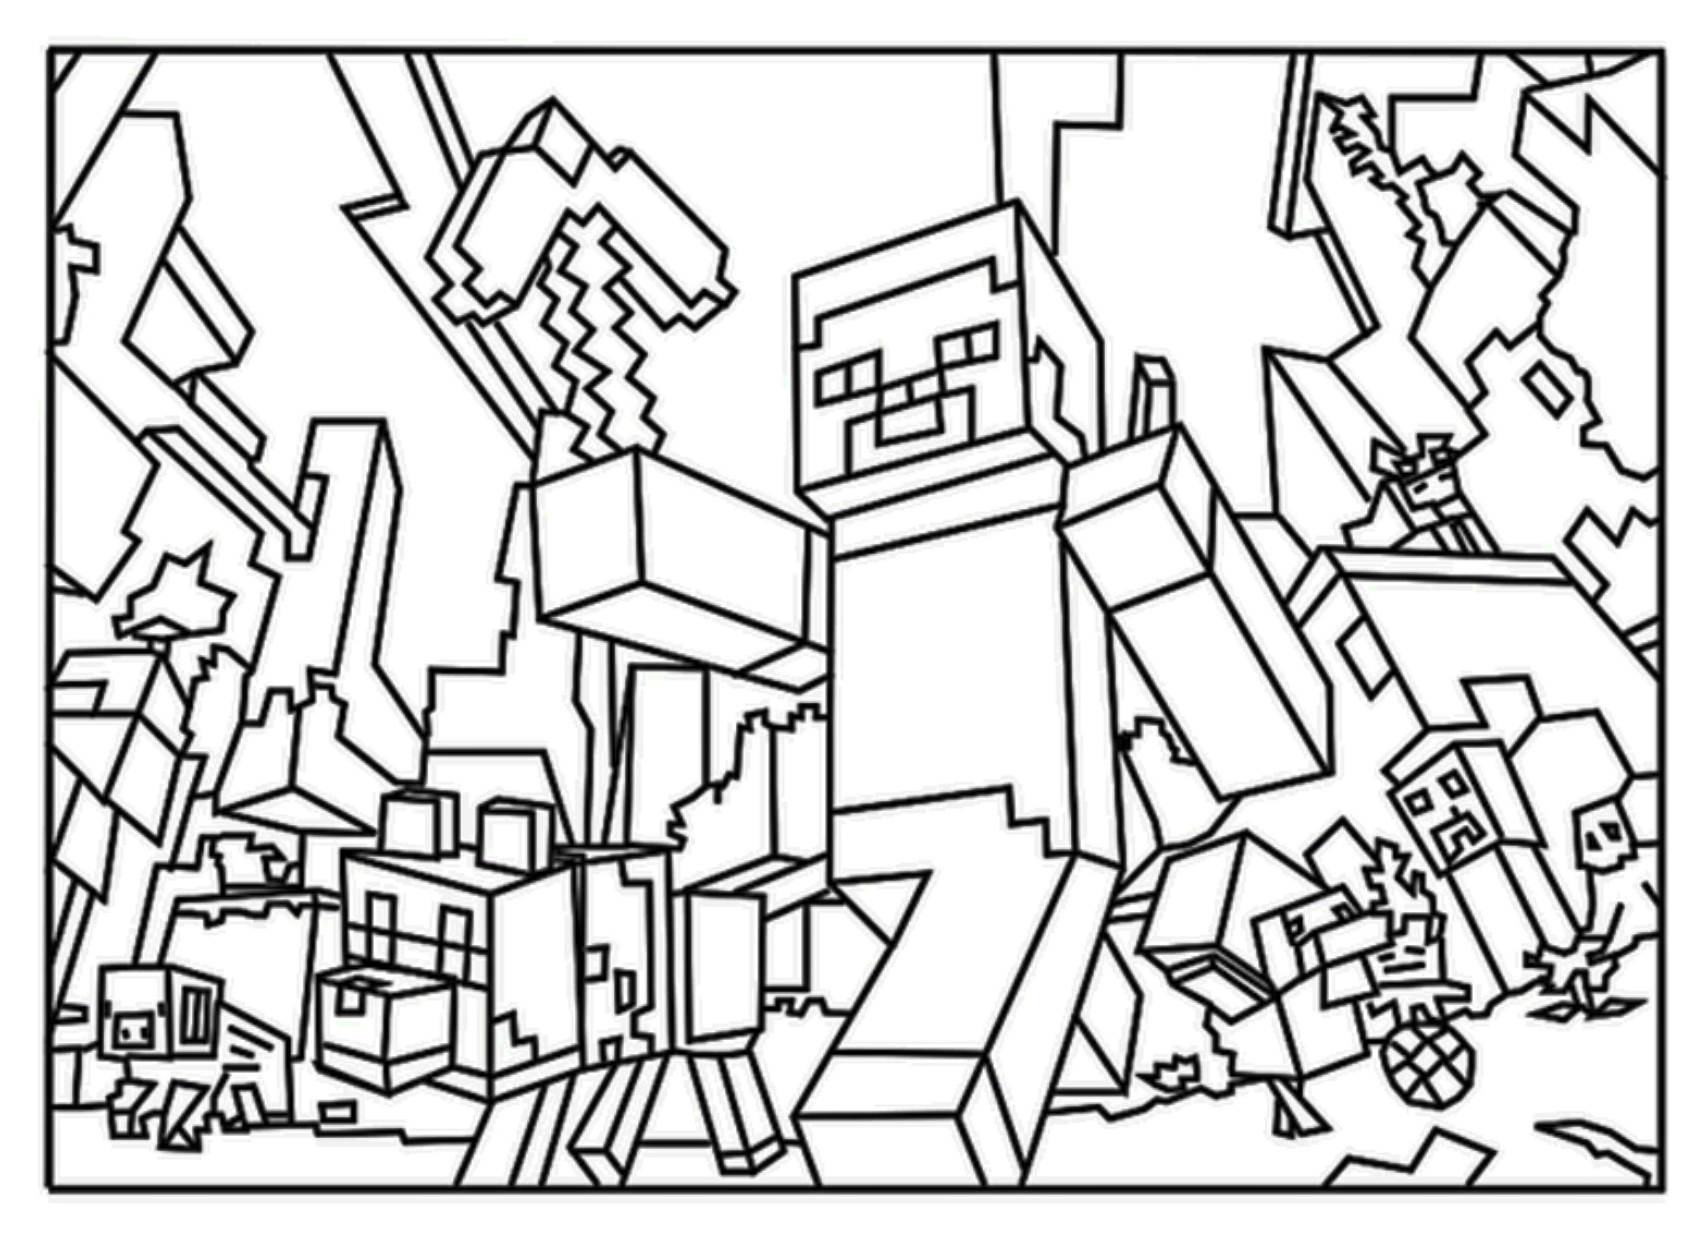 Coloring Pages : Minecraft Coloring Pages Axe Creeper ...